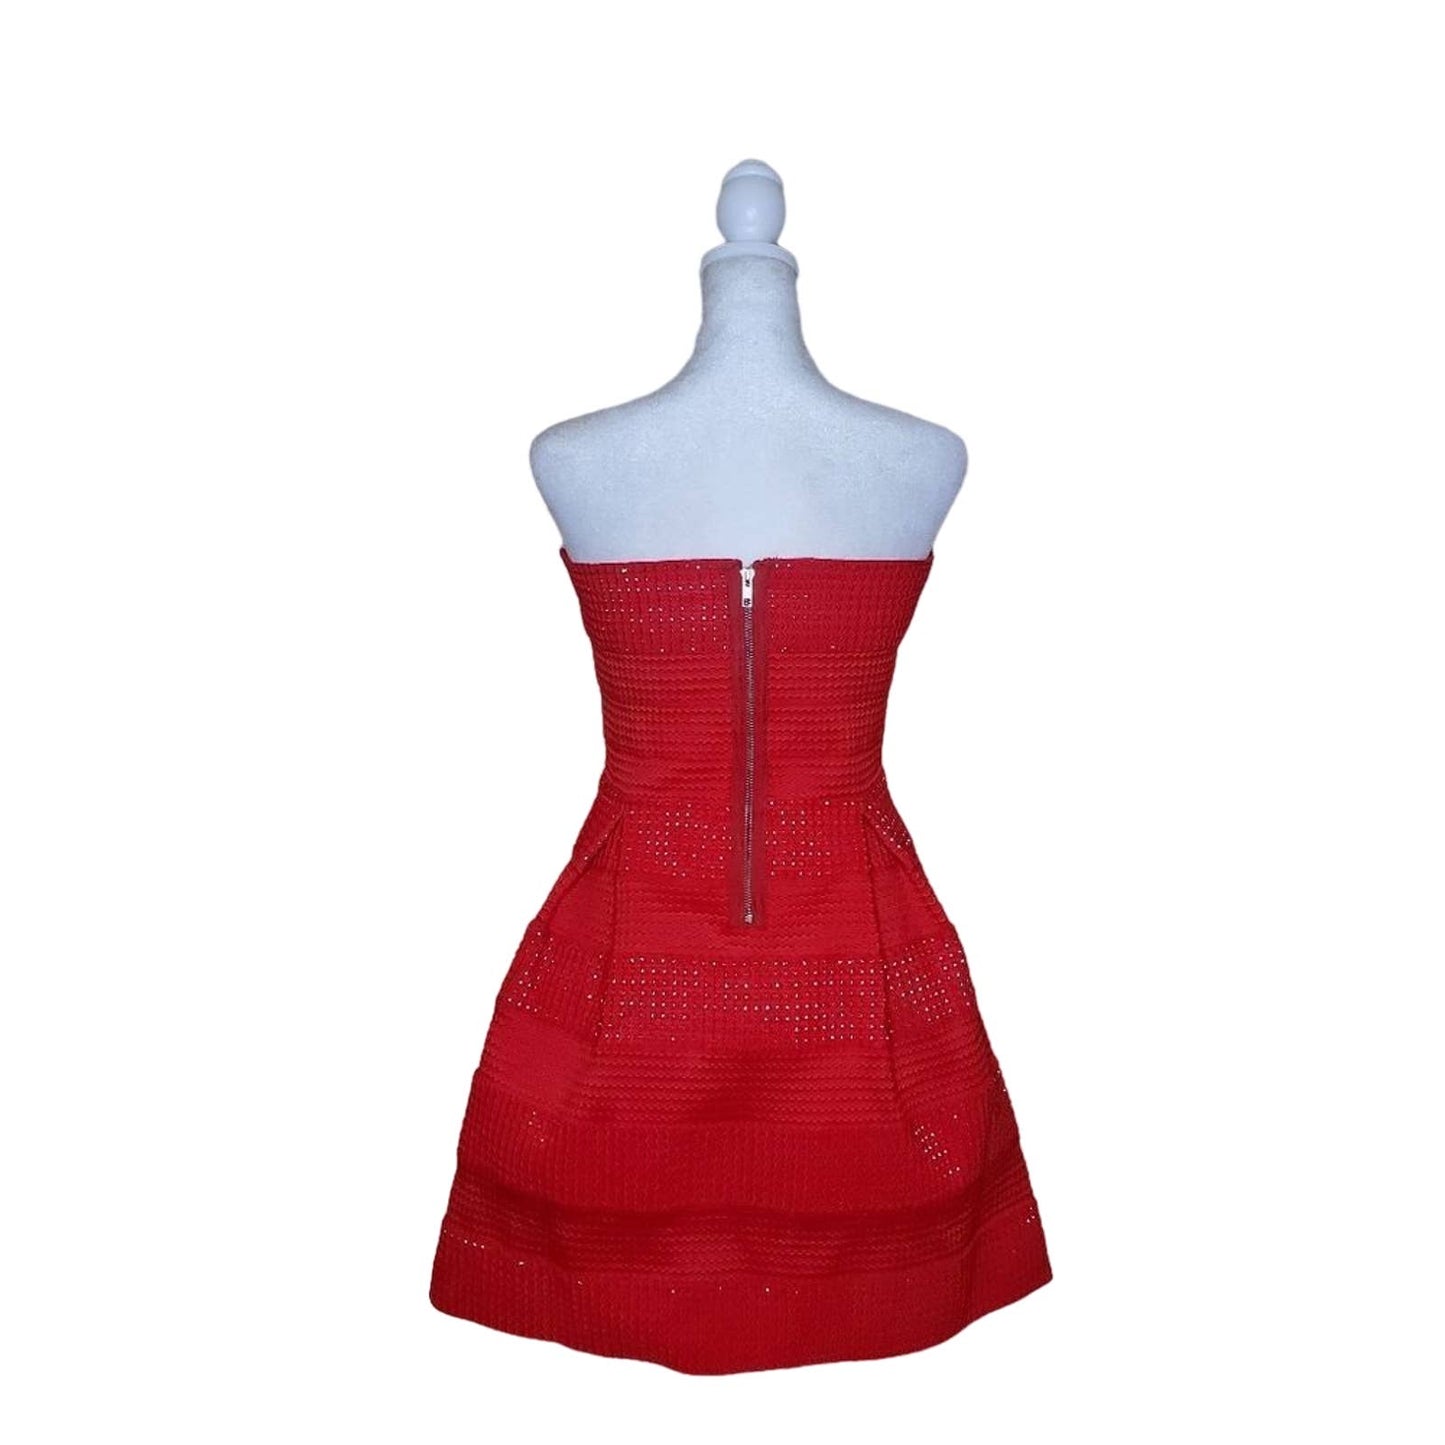 No Brand Strapless Red Mini Dress with Sparkle Detail, Size 2-4